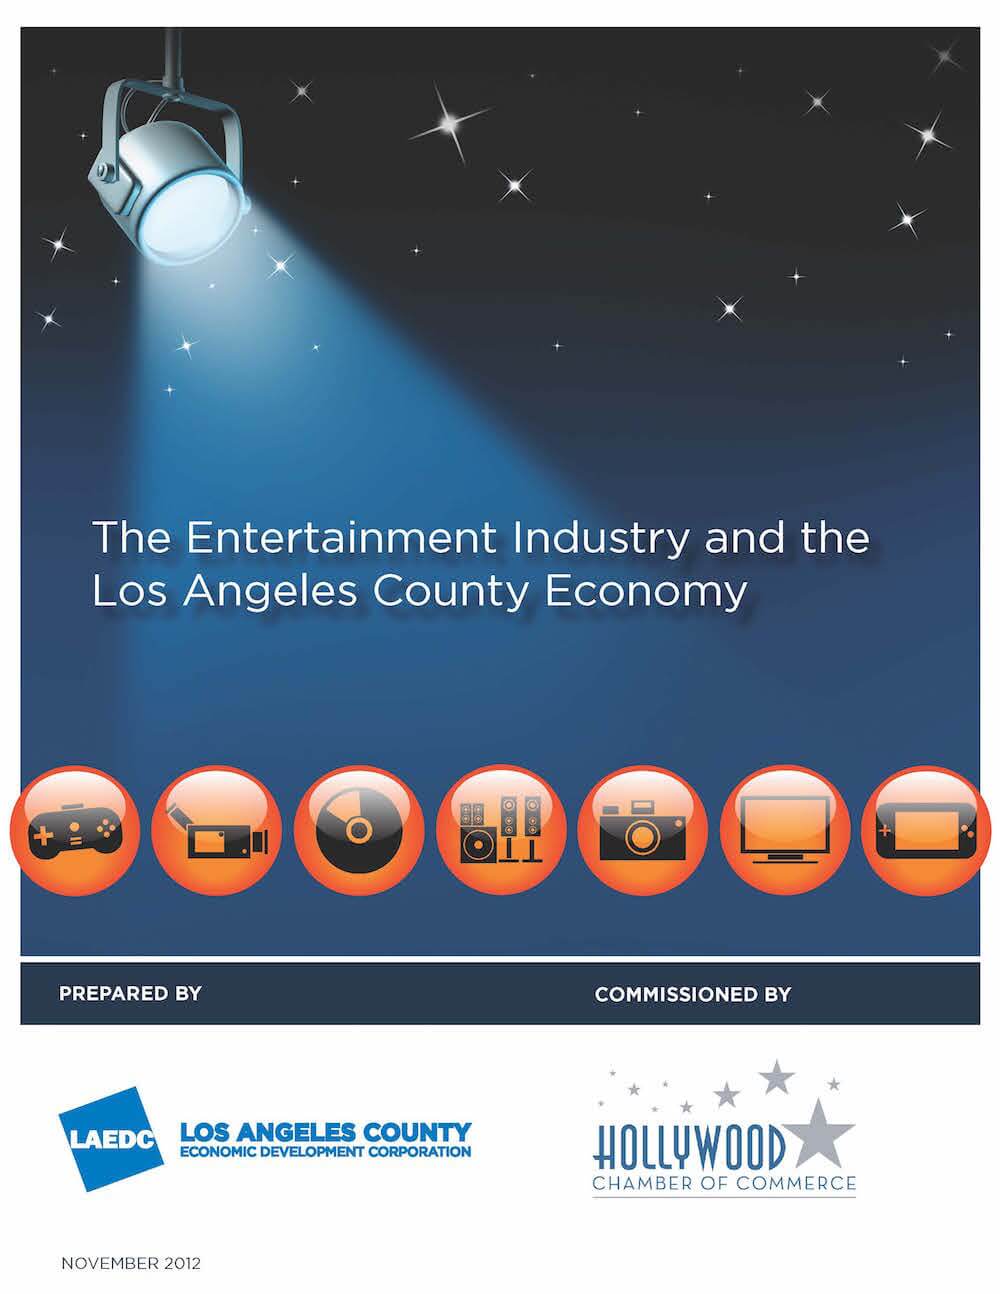 The Entertainment Industry and the Los Angeles County Economy